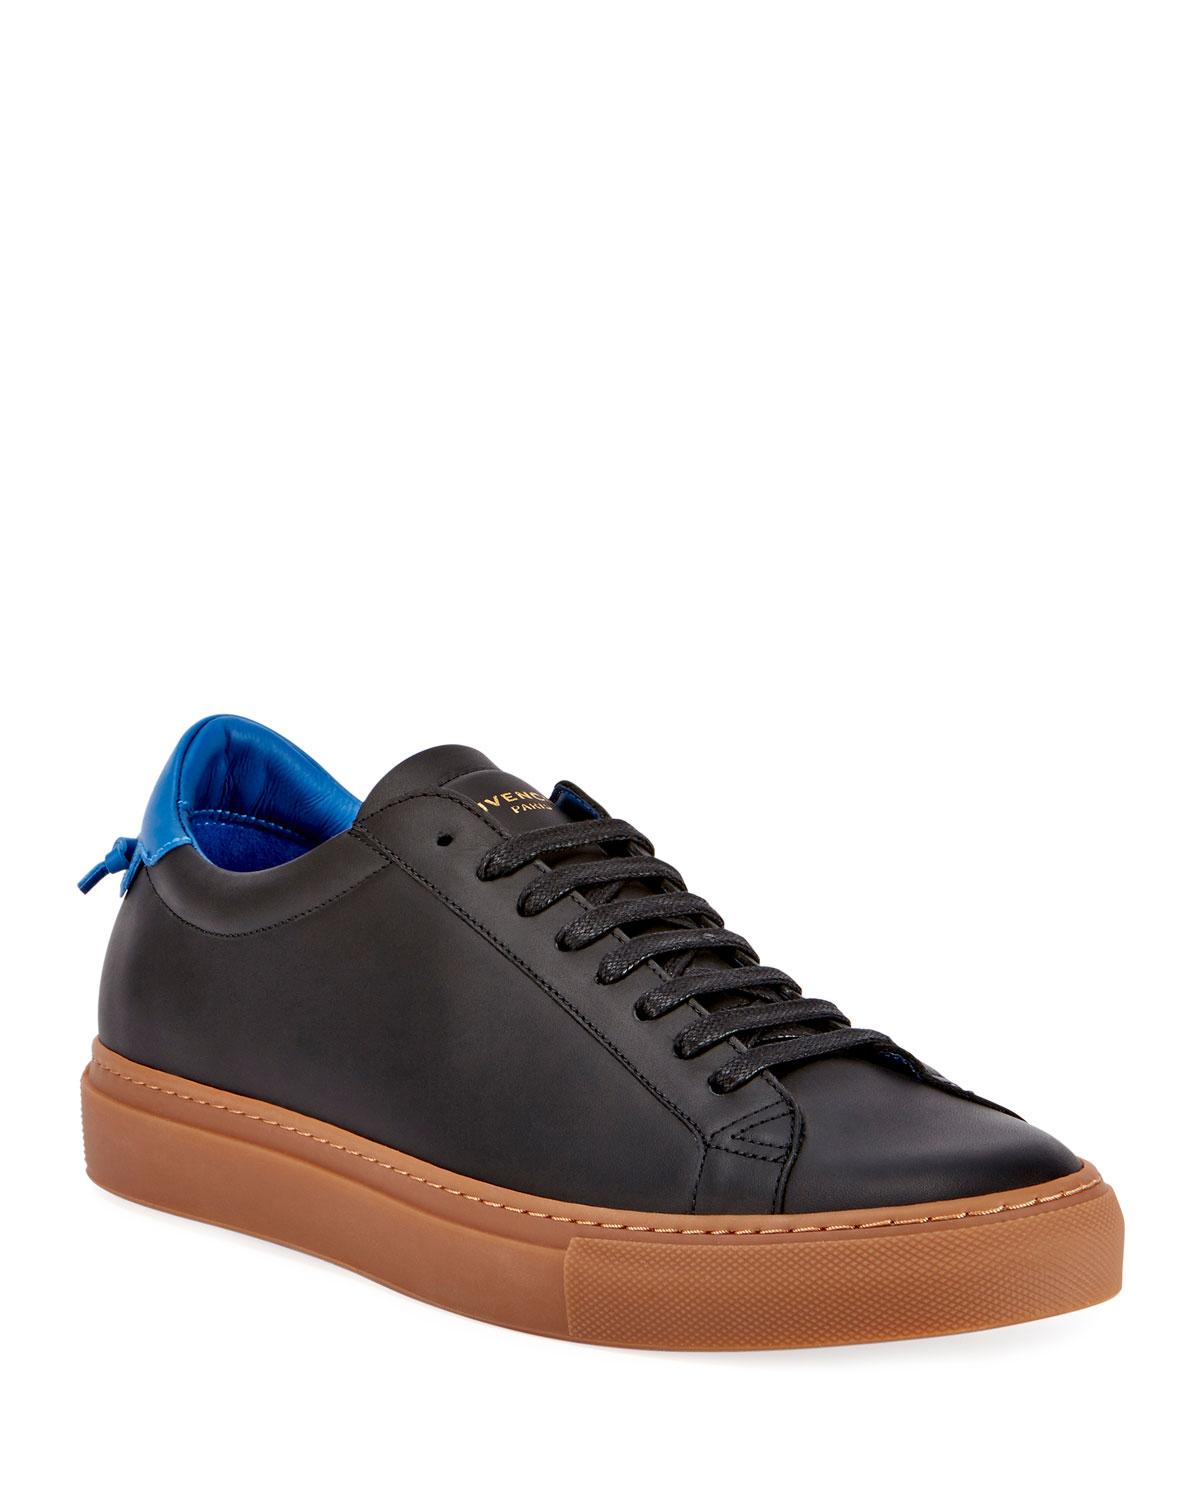 Givenchy Men's Urban Knot Leather Low-top Sneakers in Black/Blue (Blue ...